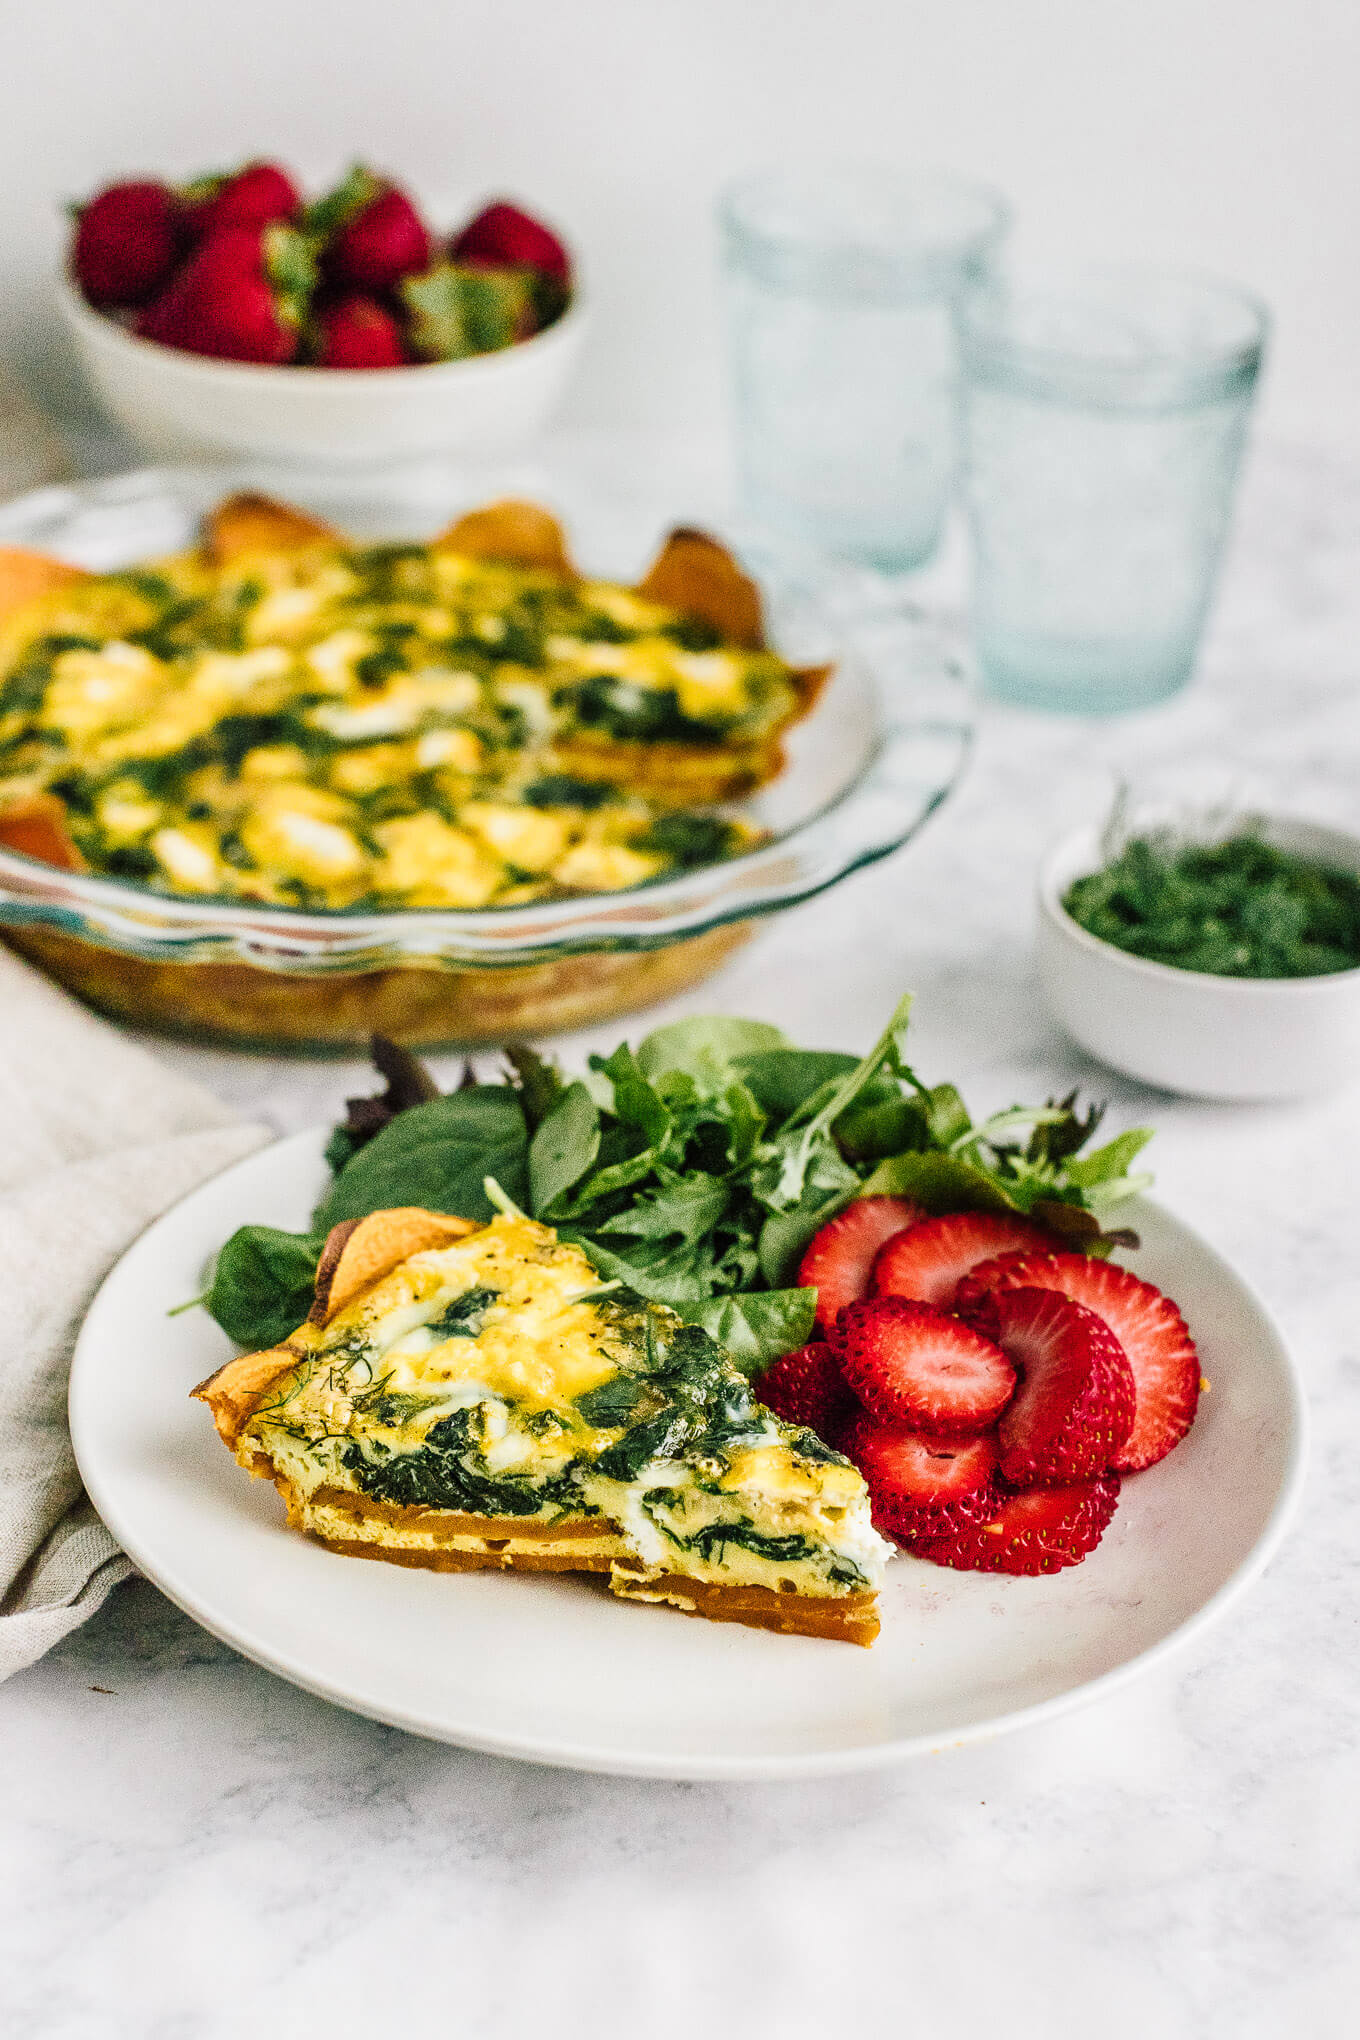 slice Spinach Quiche with Sweet Potato Crust